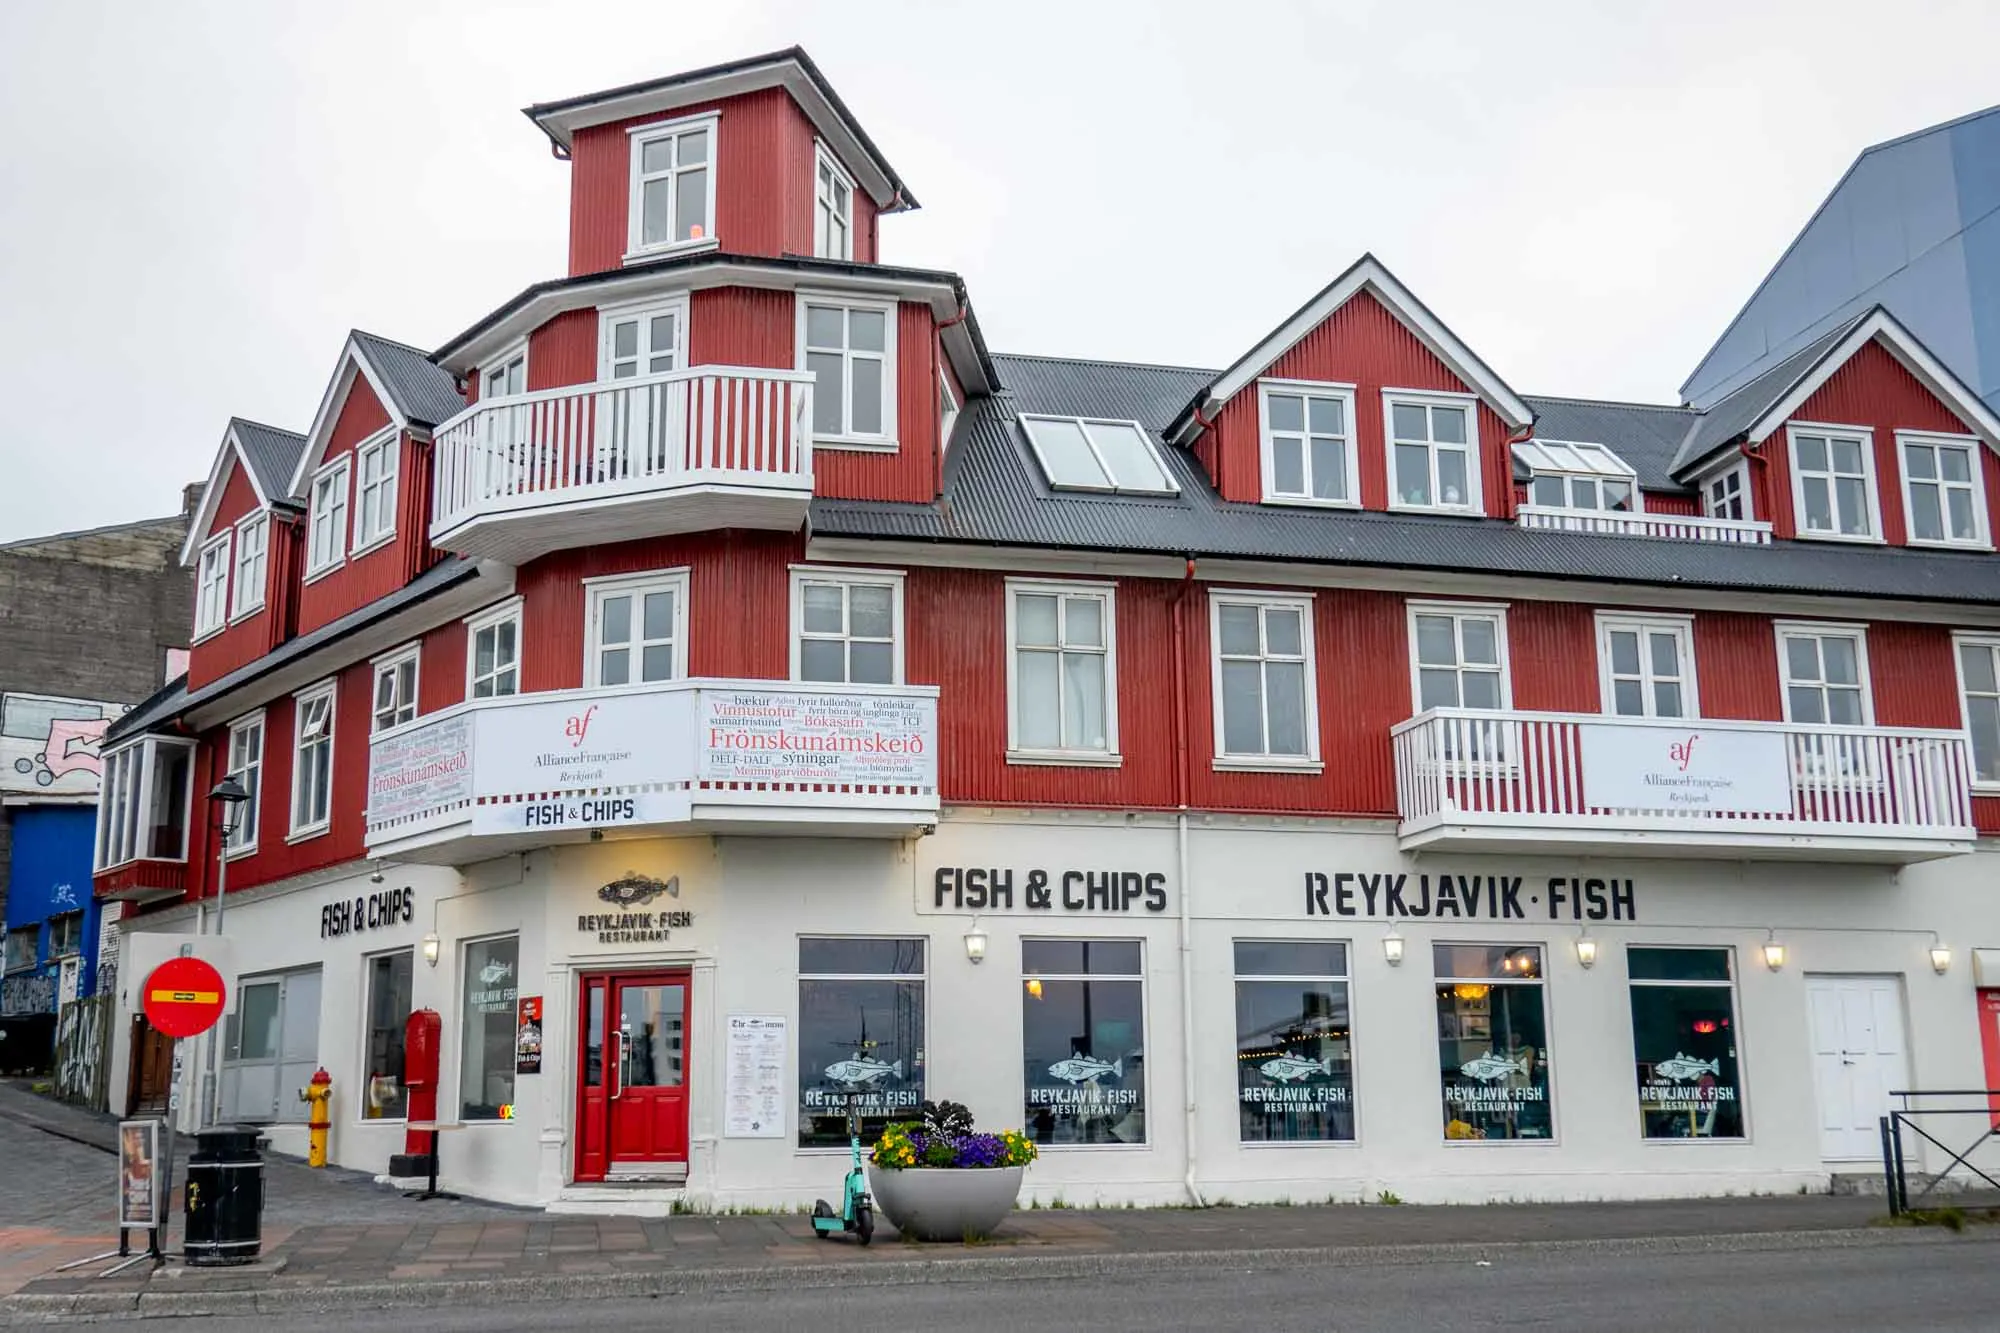 Red and white exterior of a restaurant that says "Reykjavik Fish" and "Fish & Chips"